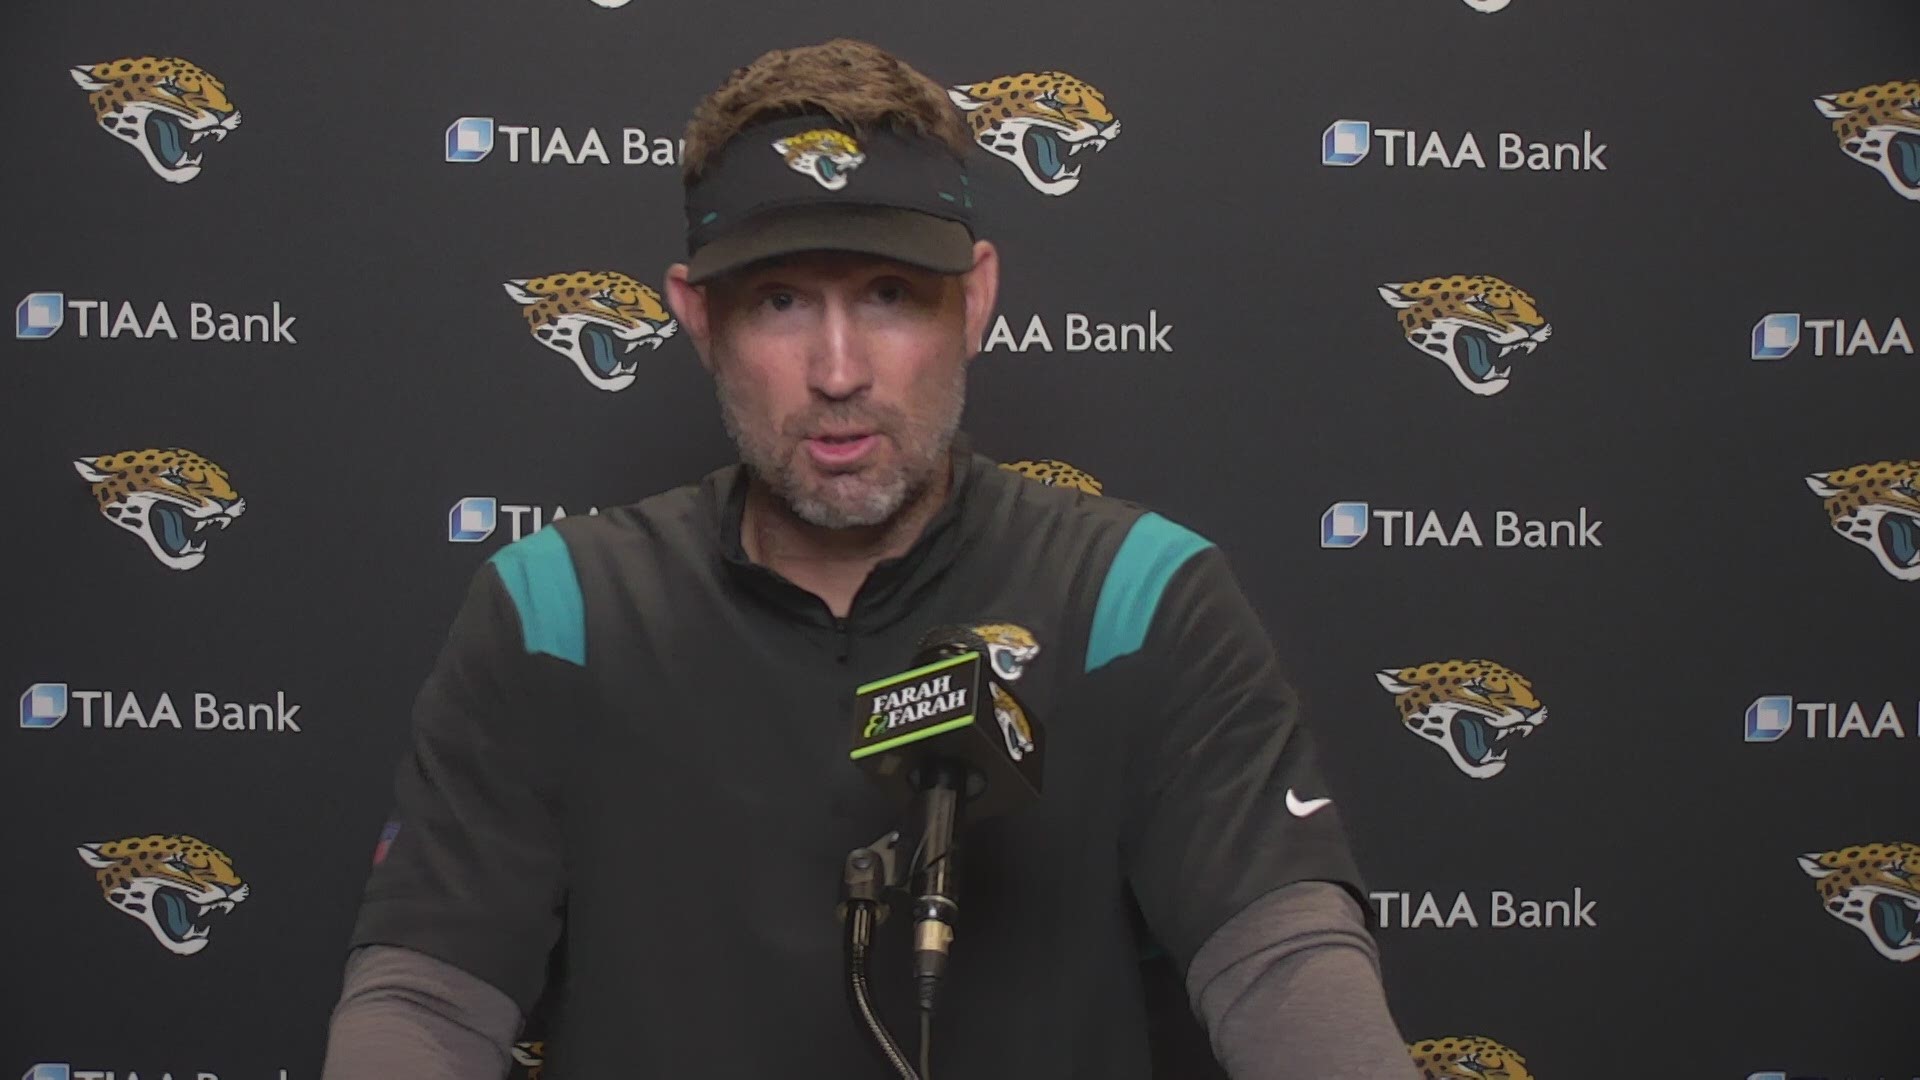 Jaguars quarterbacks coach Brian Schottenheimer reflects ahead of his first Father's Day without his father, legendary NFL head coach Marty Schottenheimer.